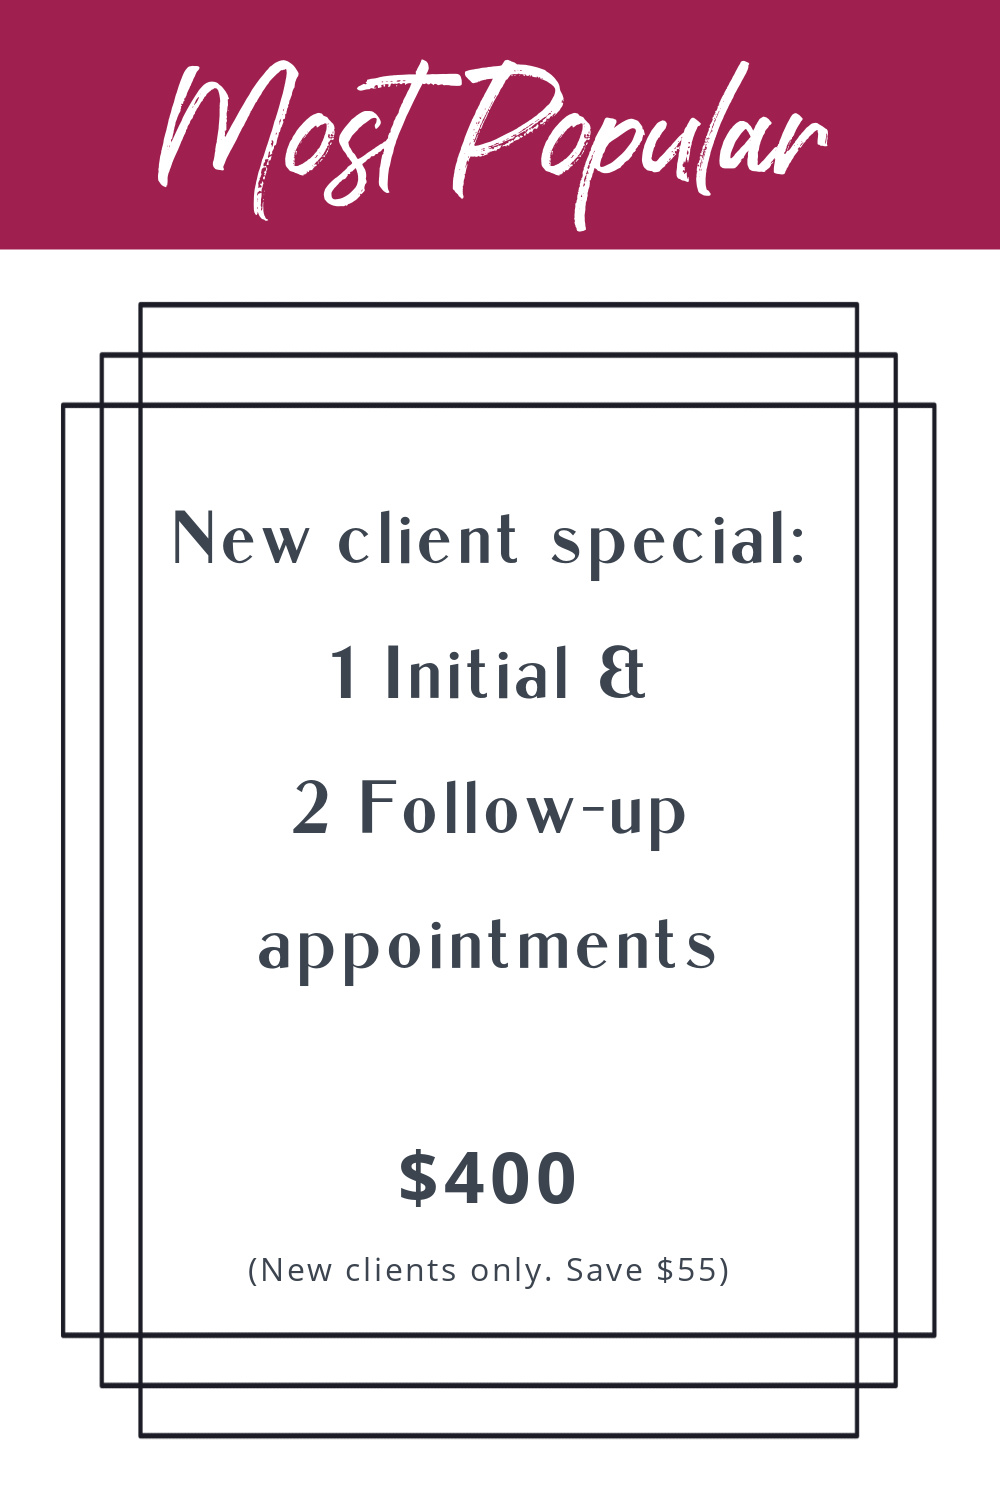 New client special